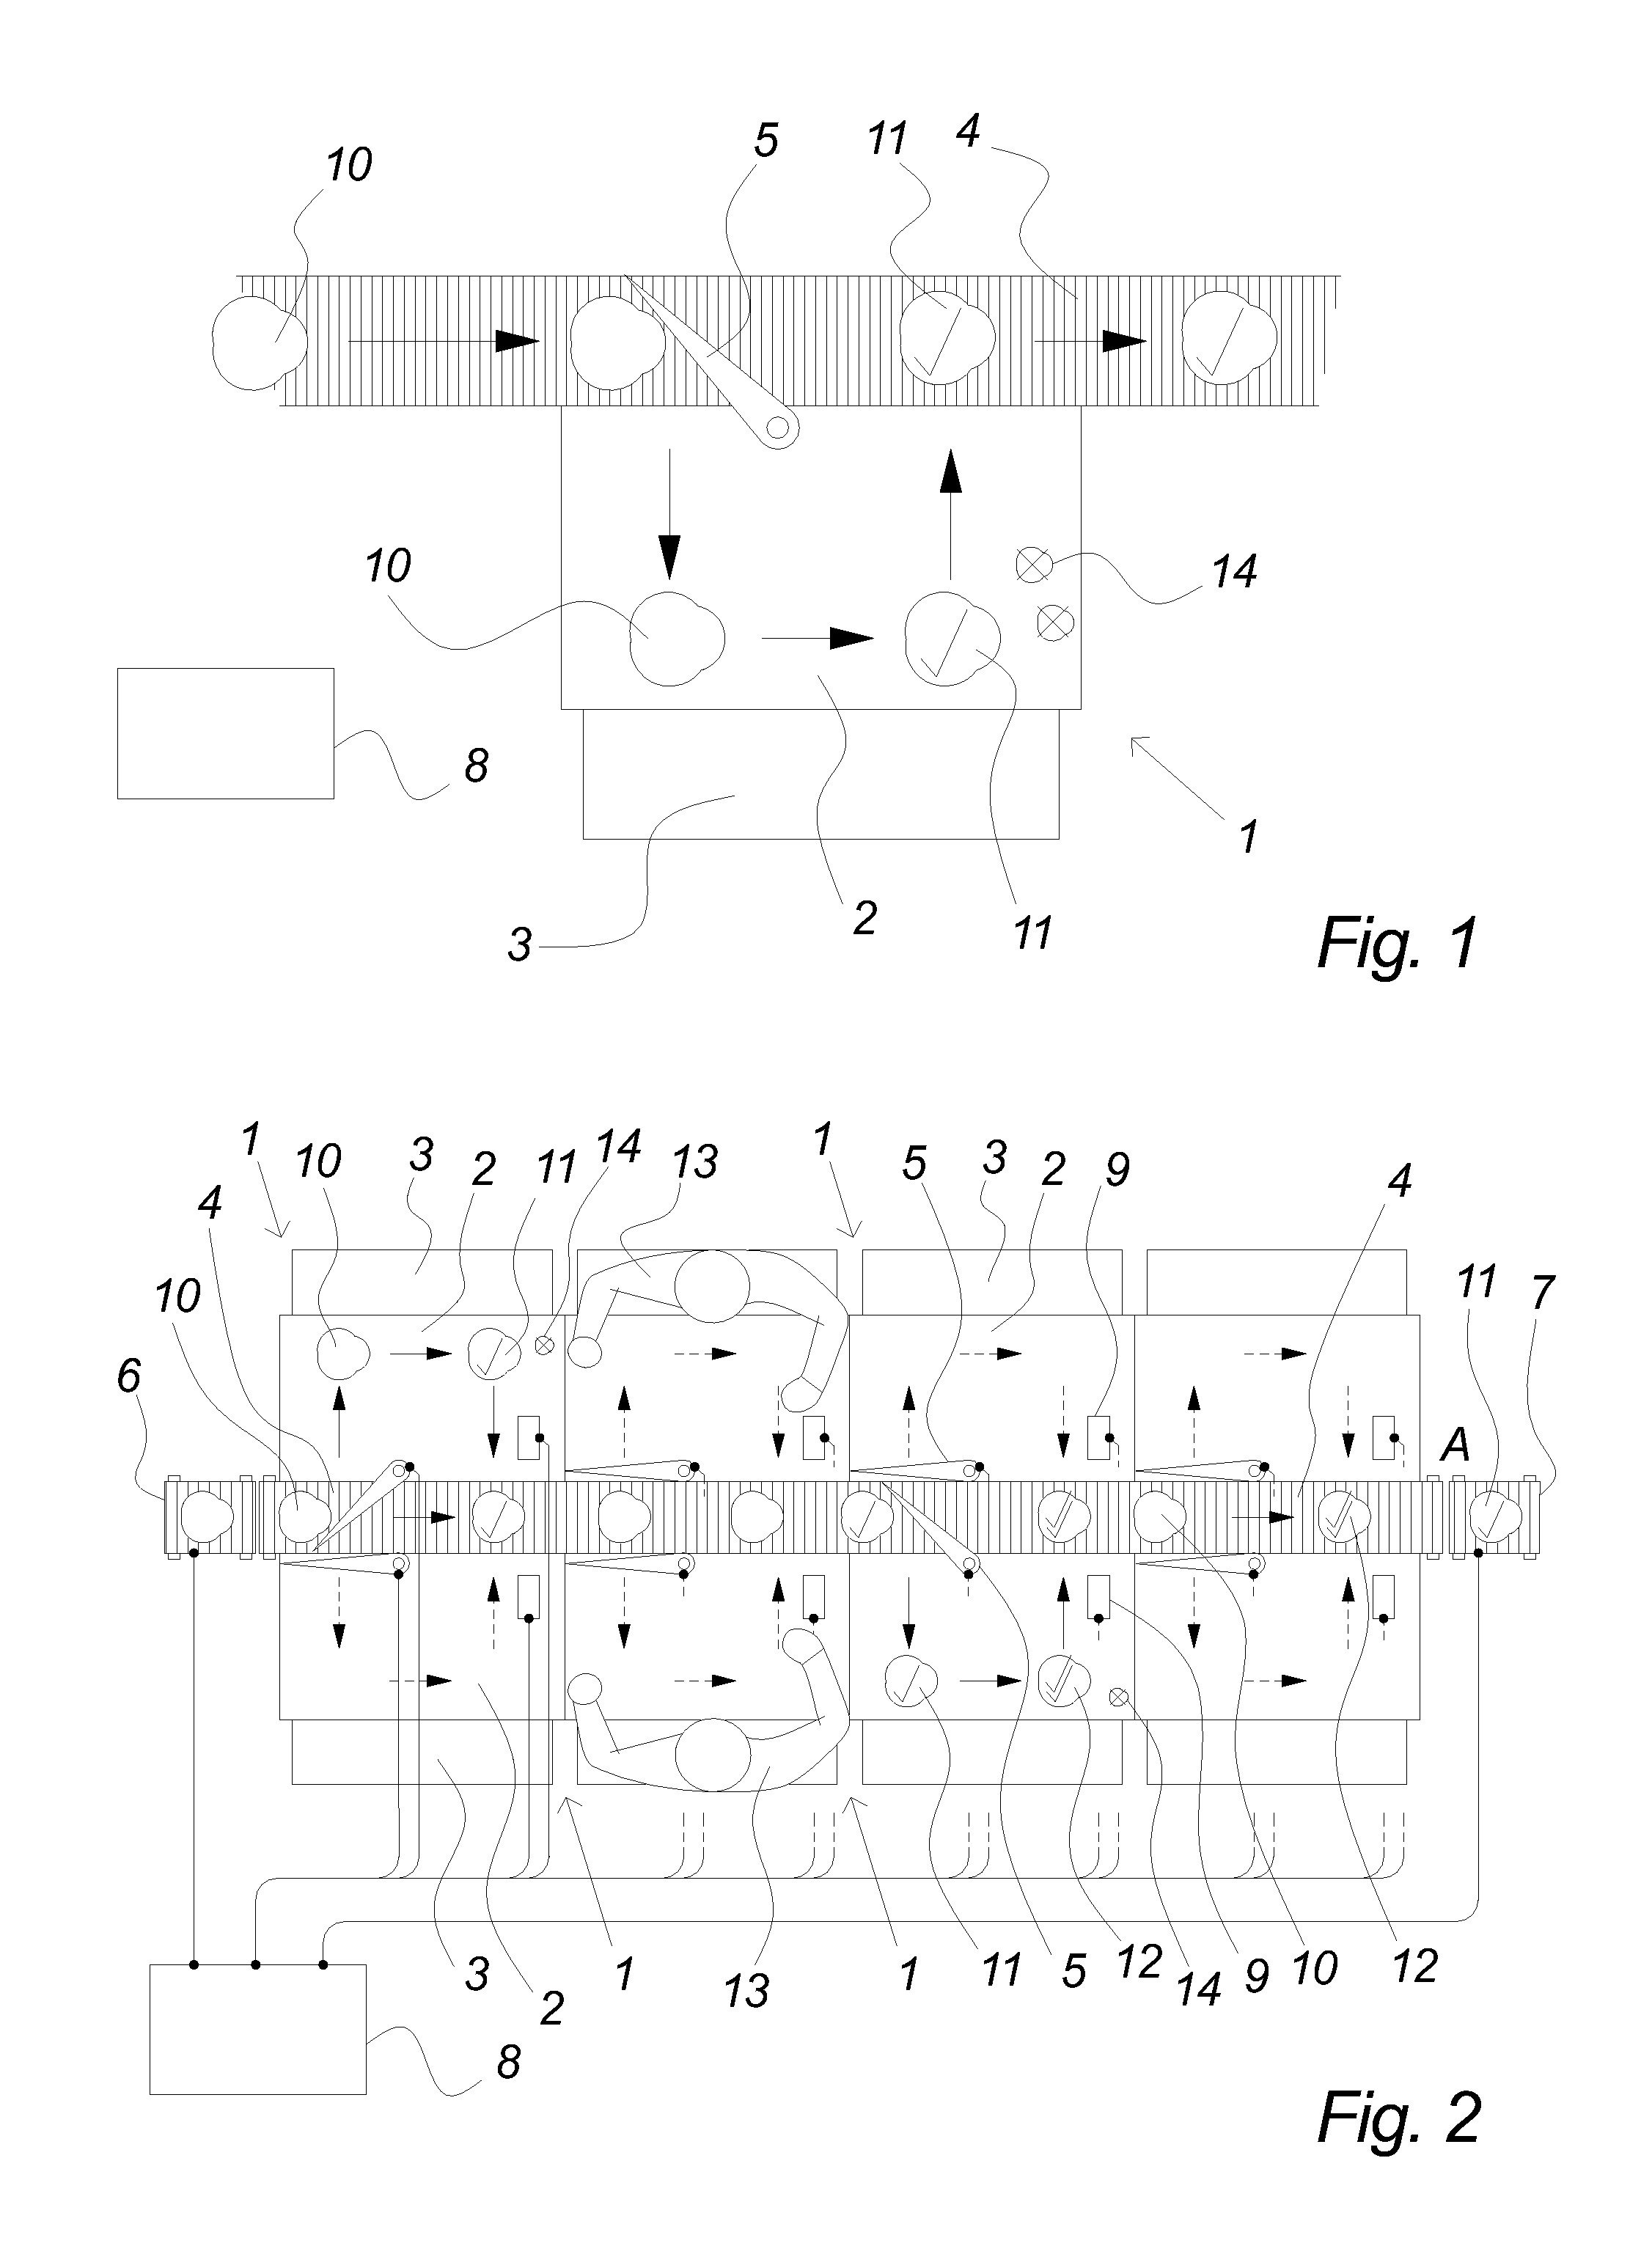 Method for processing items such as pieces of meat